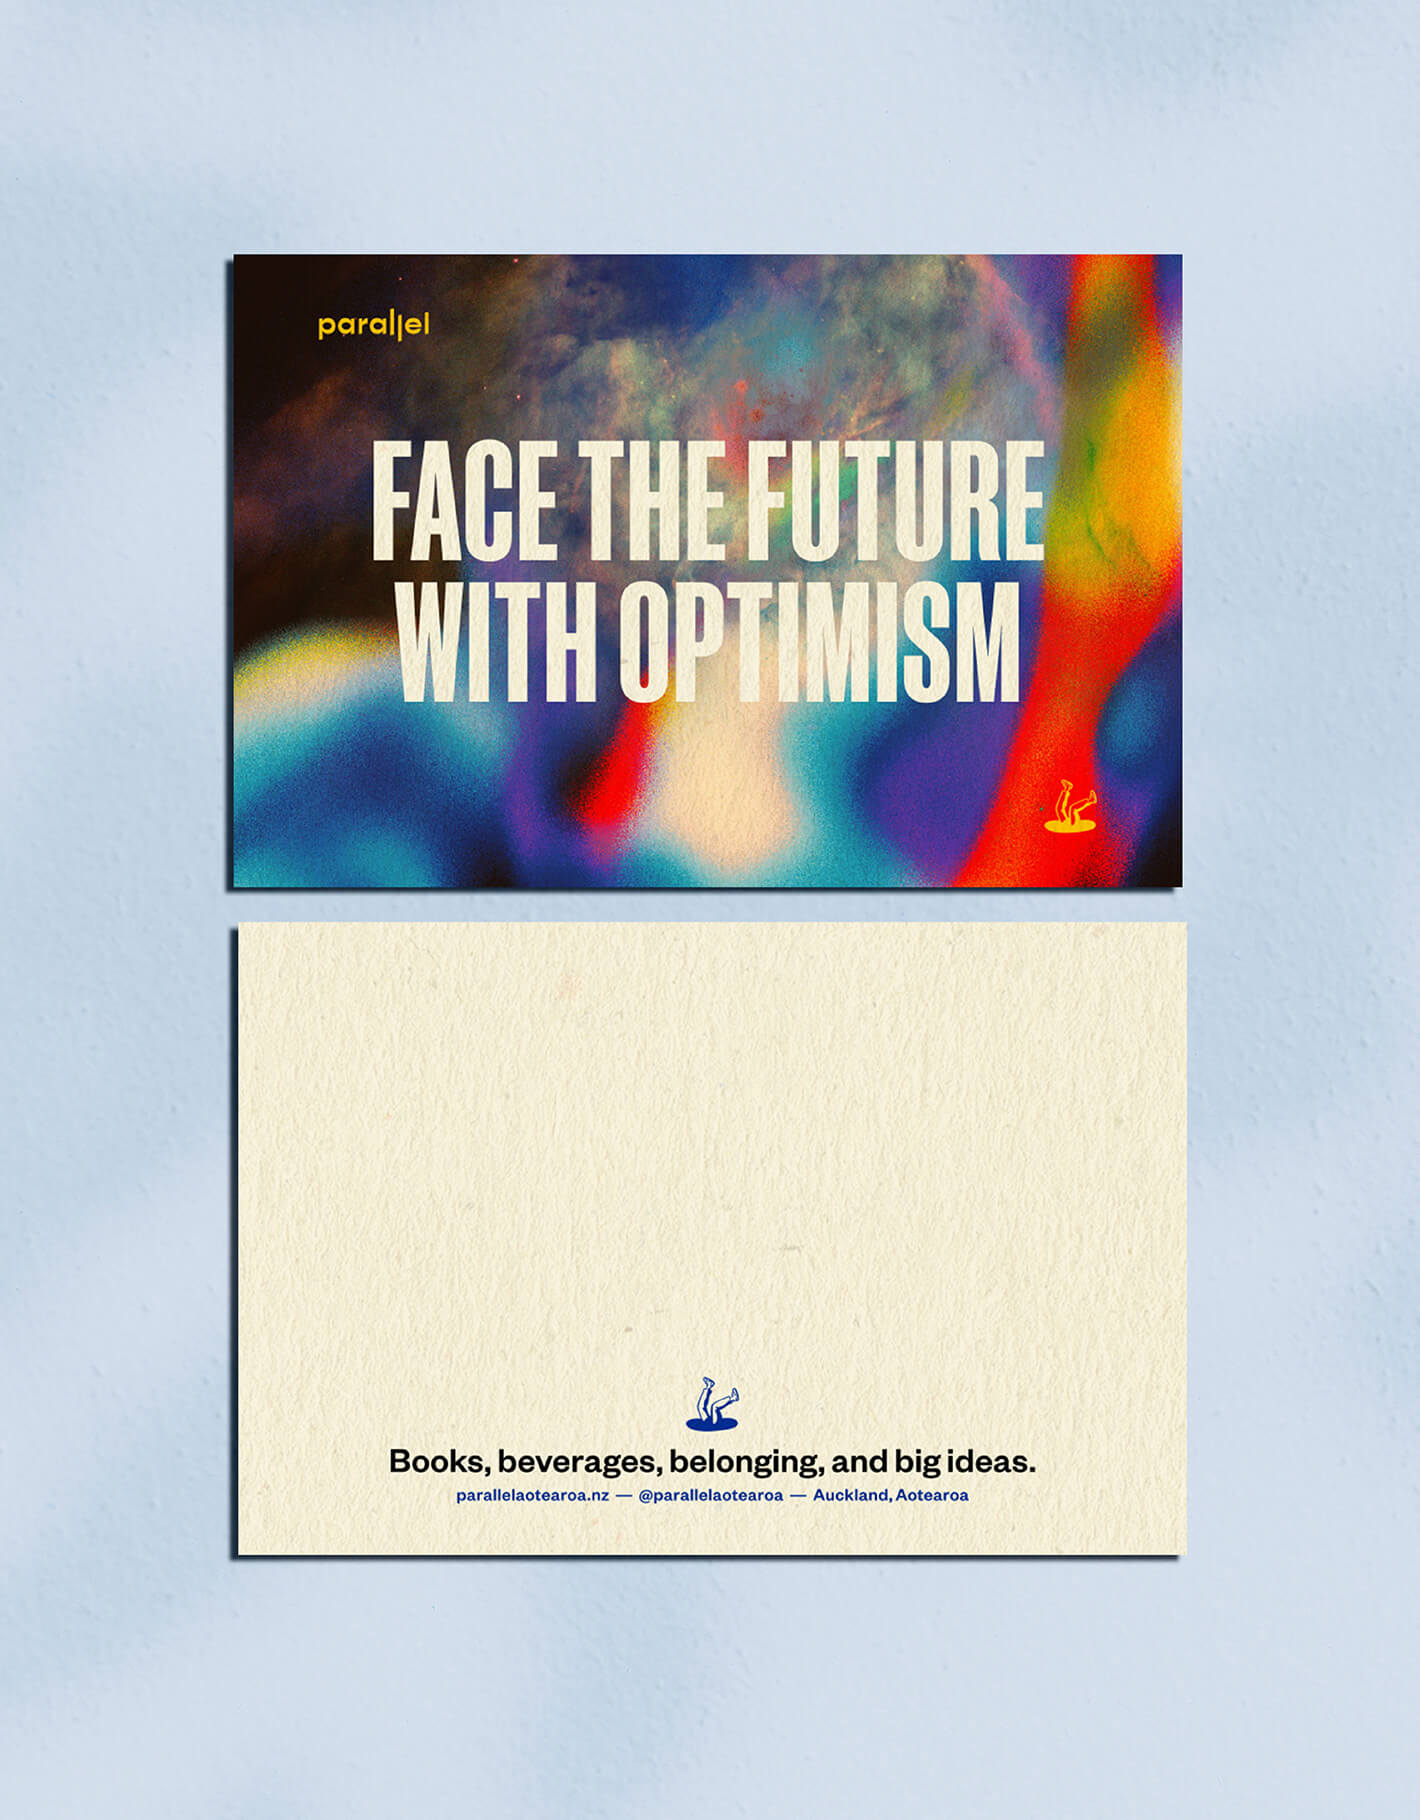 Brand designer portfolio image of the Parallel thank you cards. The front features a brand support graphic and the phrase ‘face the future with optimism’ while the back is mostly blank to allow for messages.